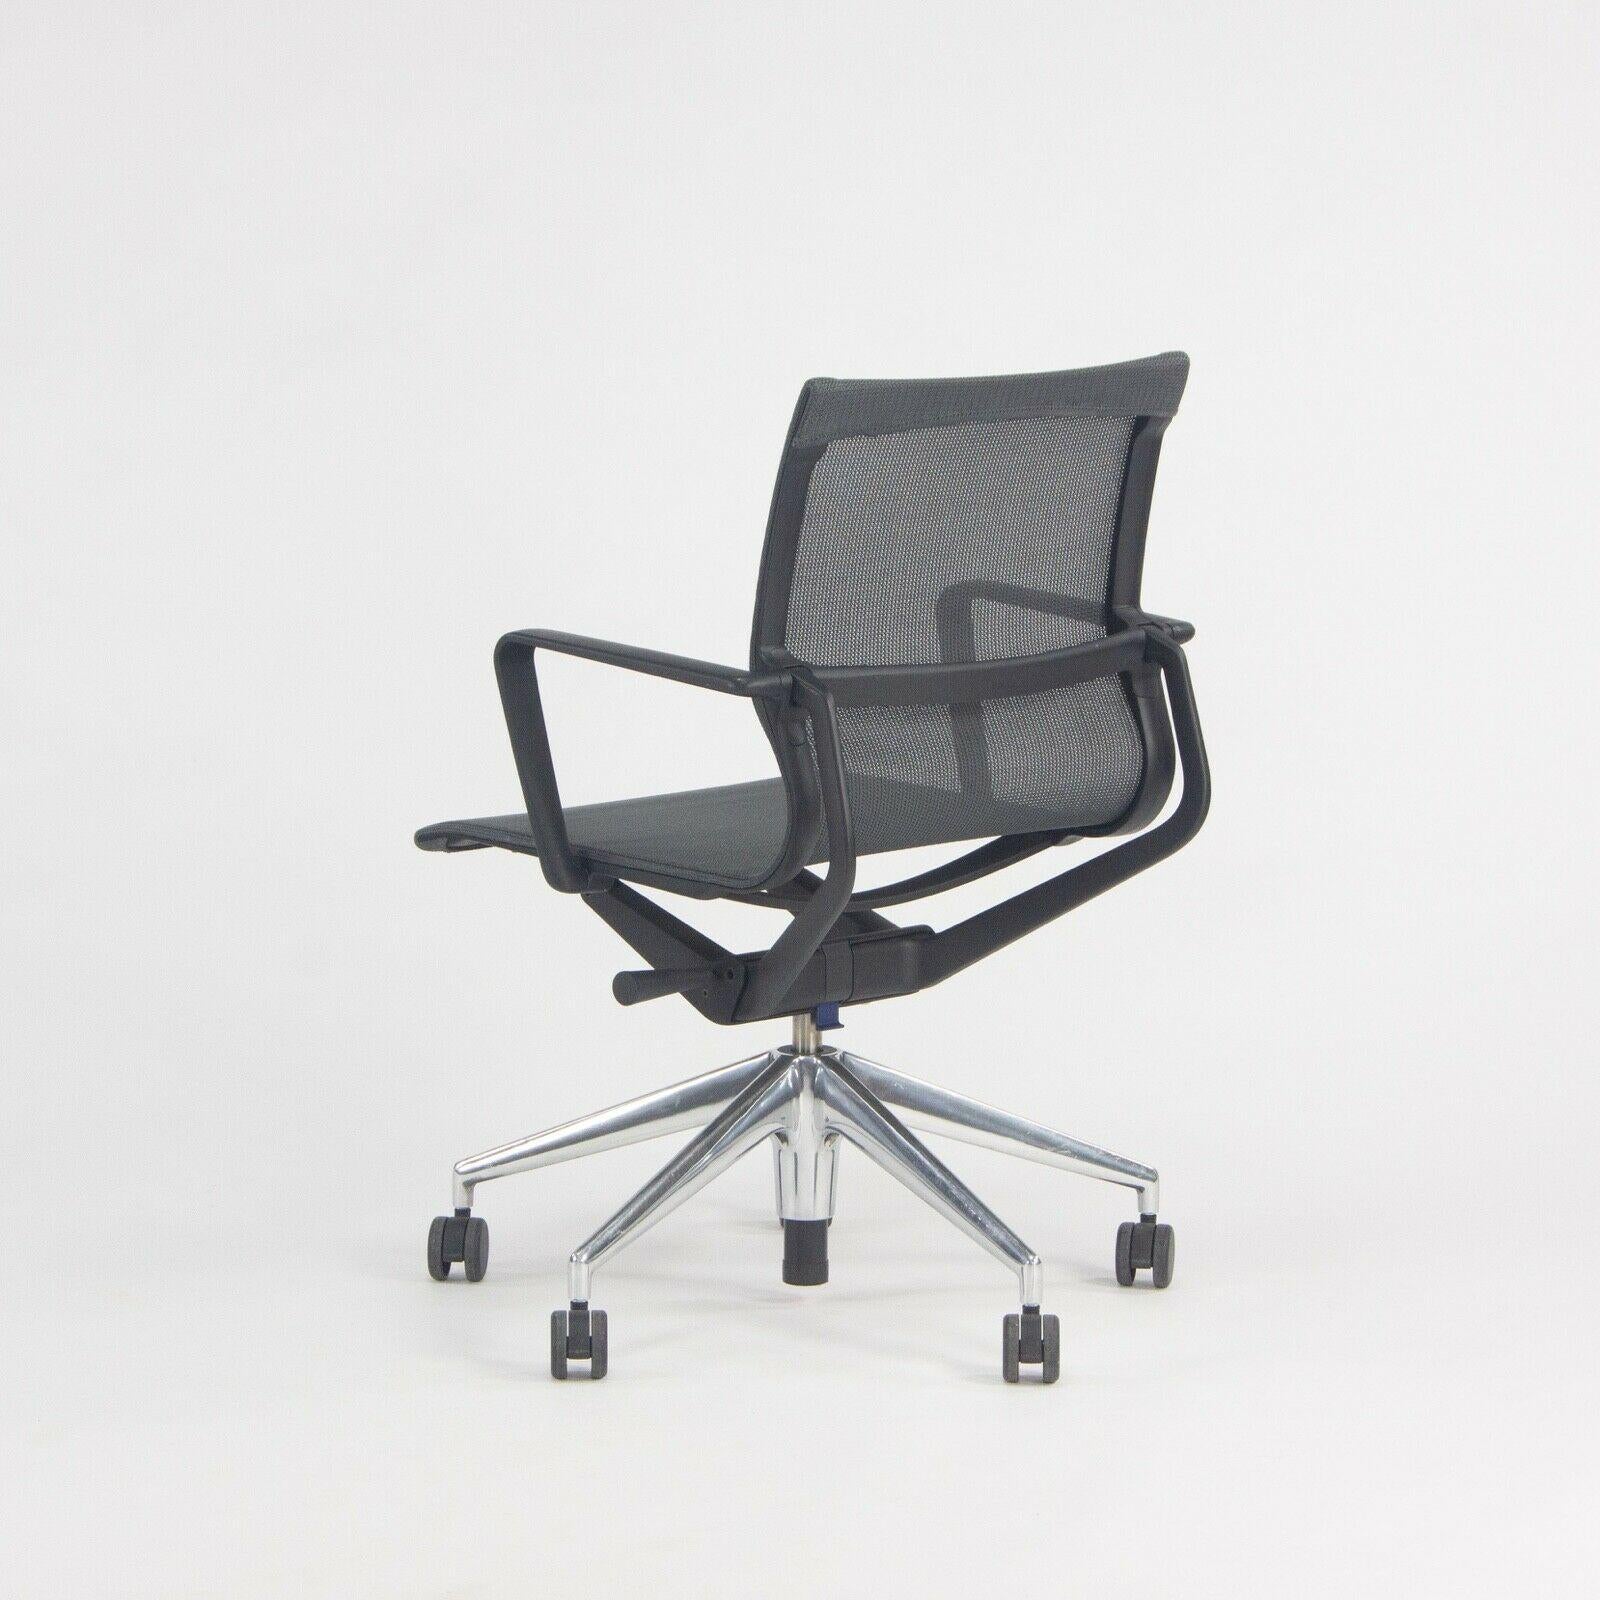 Aluminum 2018 Vitra Physix Rolling Desk Chair by Alberta Meda Gray Mesh Sets Available For Sale